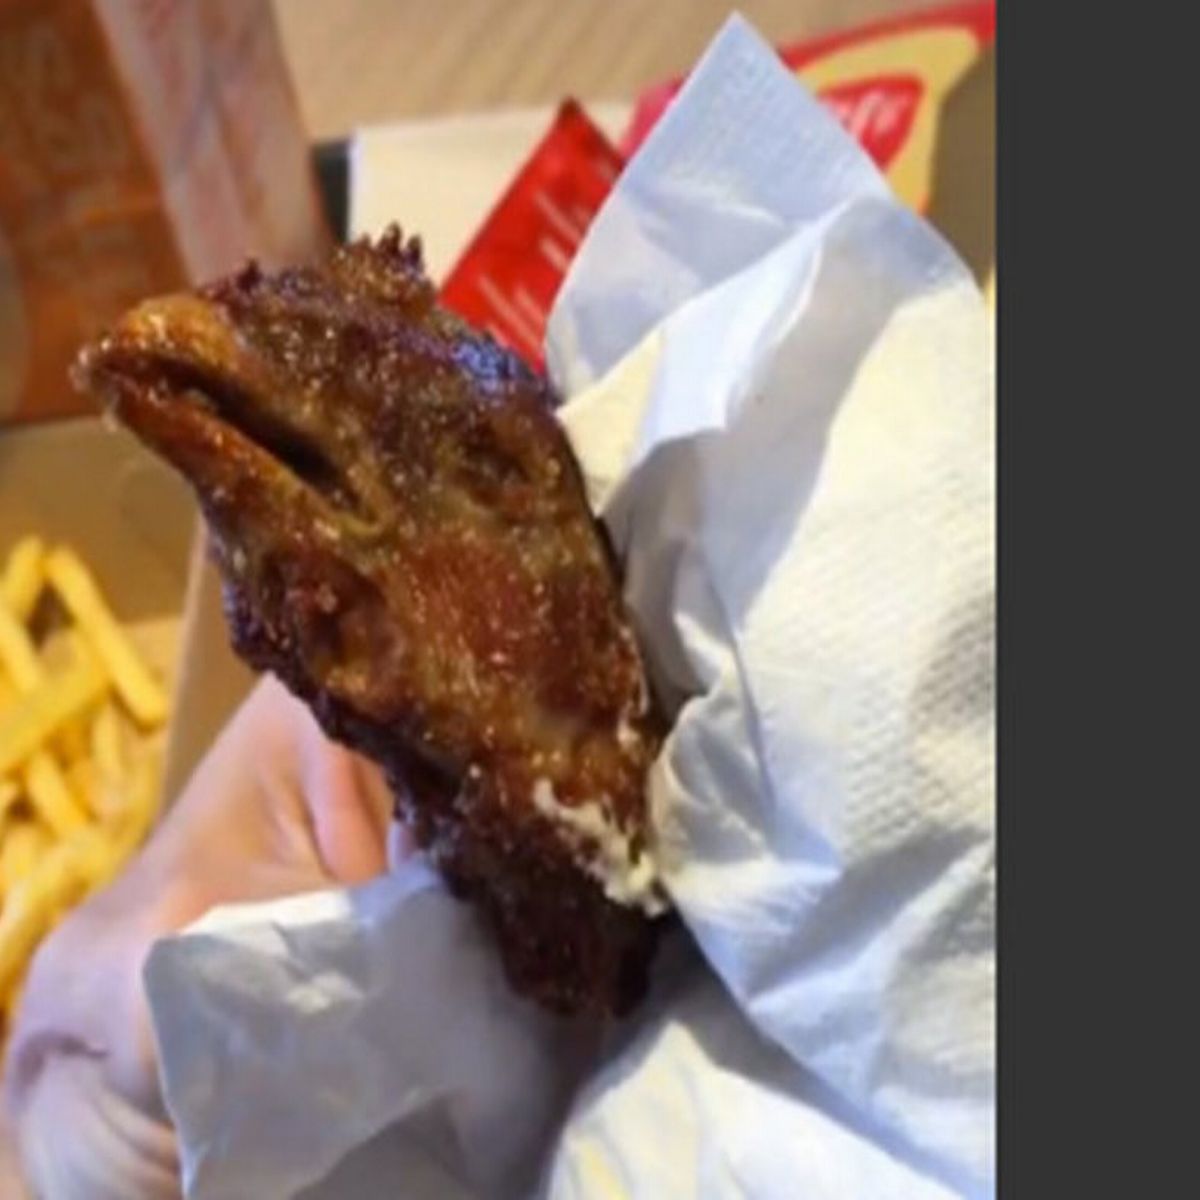 The British Diner Was "Disgusted" After Discovering The Chicken Head In The KFC Box